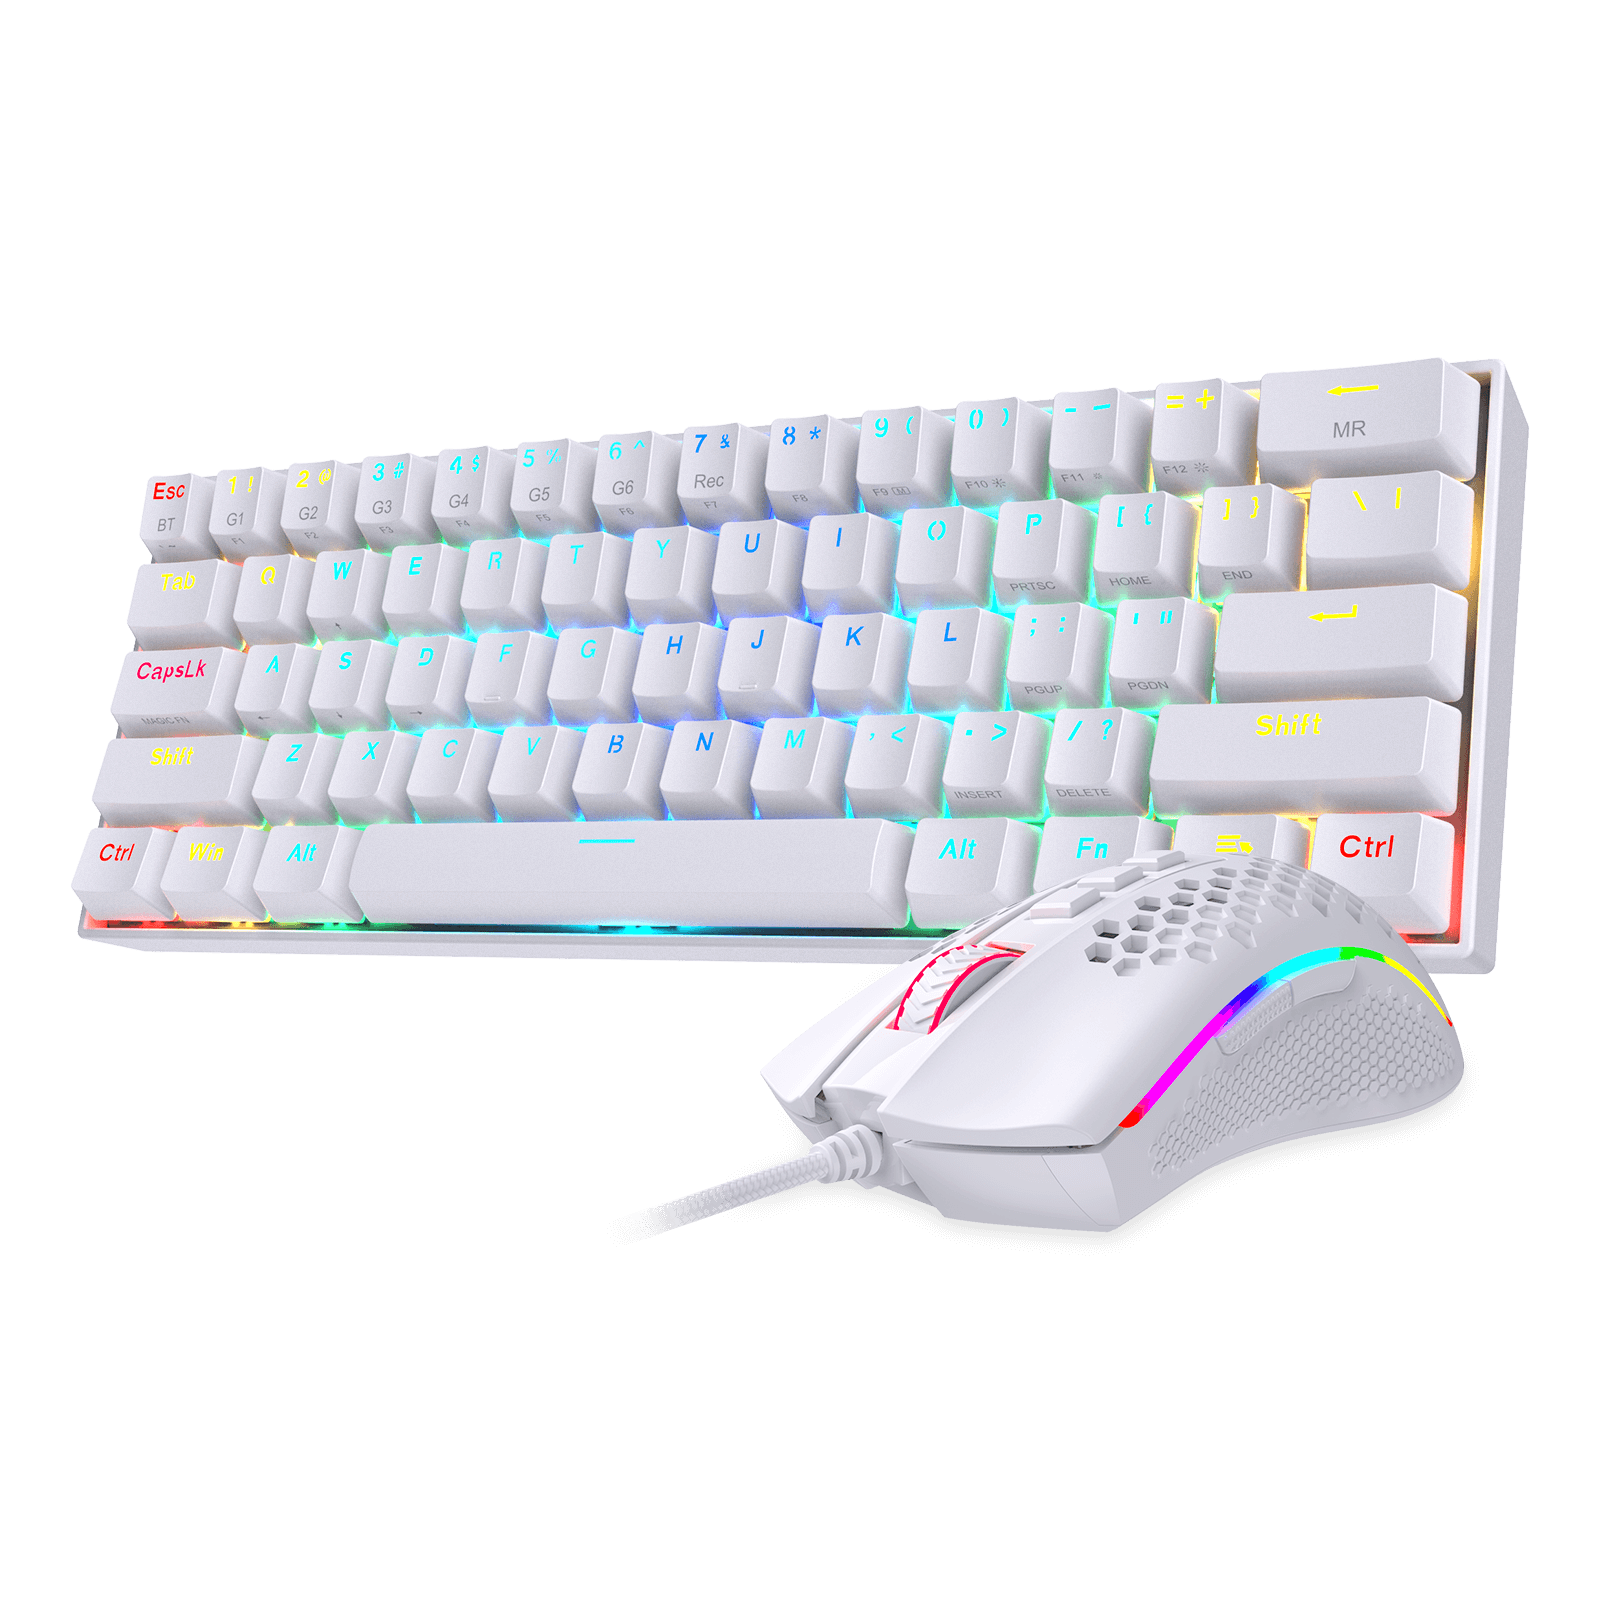 How to Get Better at Gaming with a Keyboard and Mouse